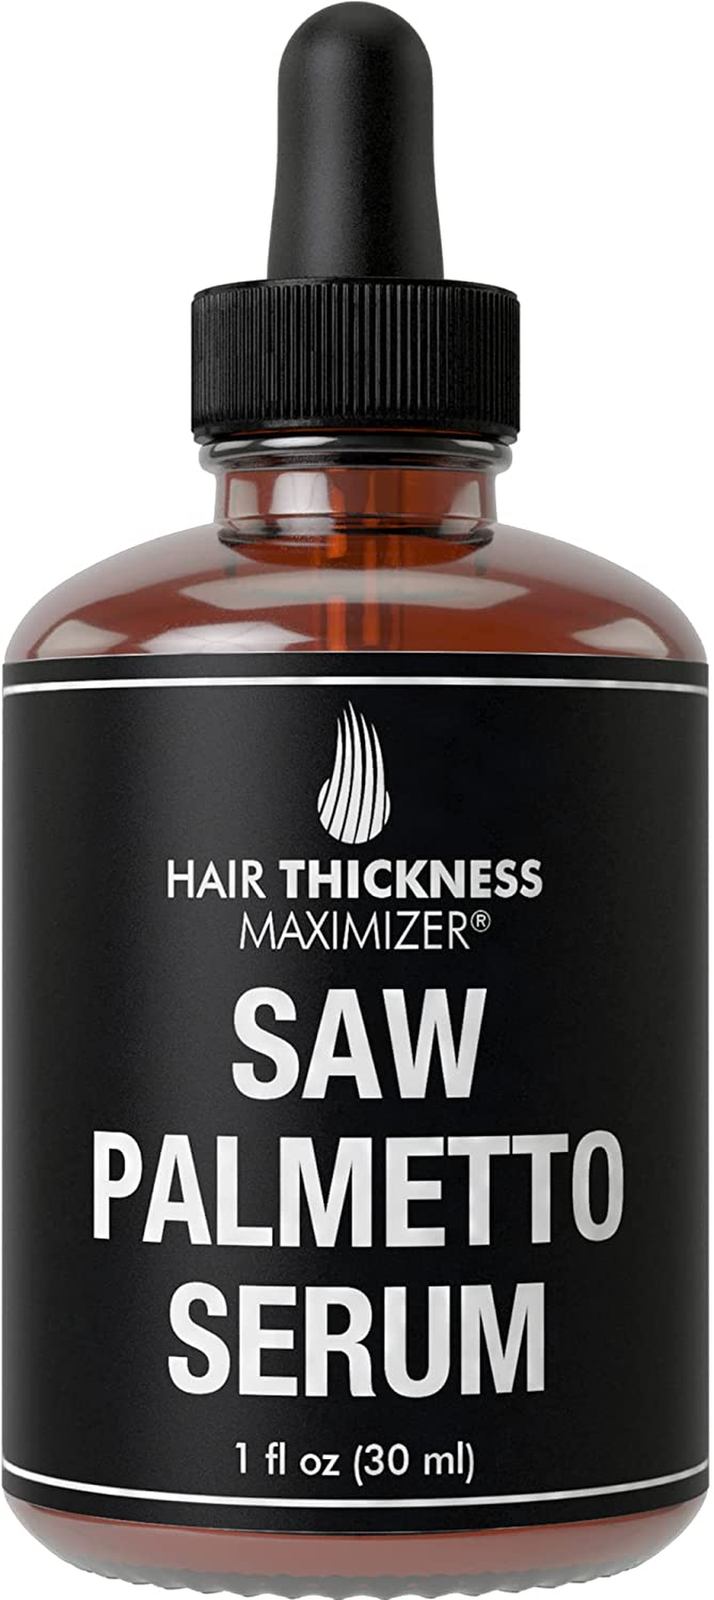 Organic Saw Palmetto Oil Serum. Stop Hair Loss Now by Hair Thickness  Maximizer 7445005726747 | eBay